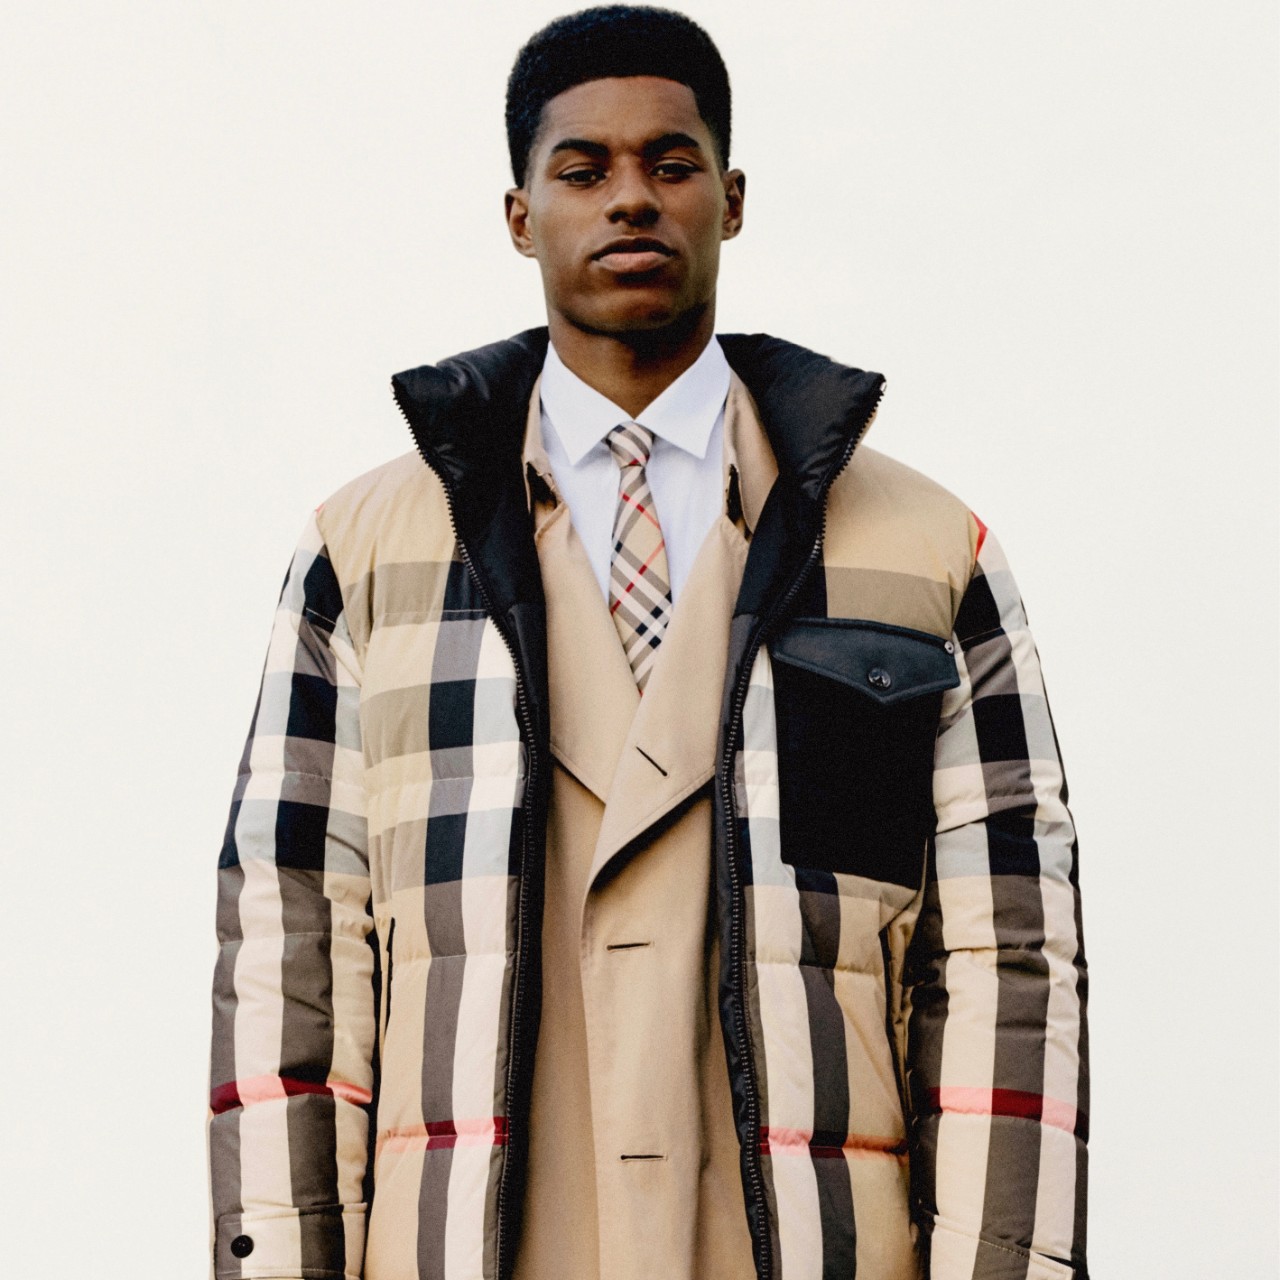 Burberry Looks Online for Ways to Gain Customers - The New York Times